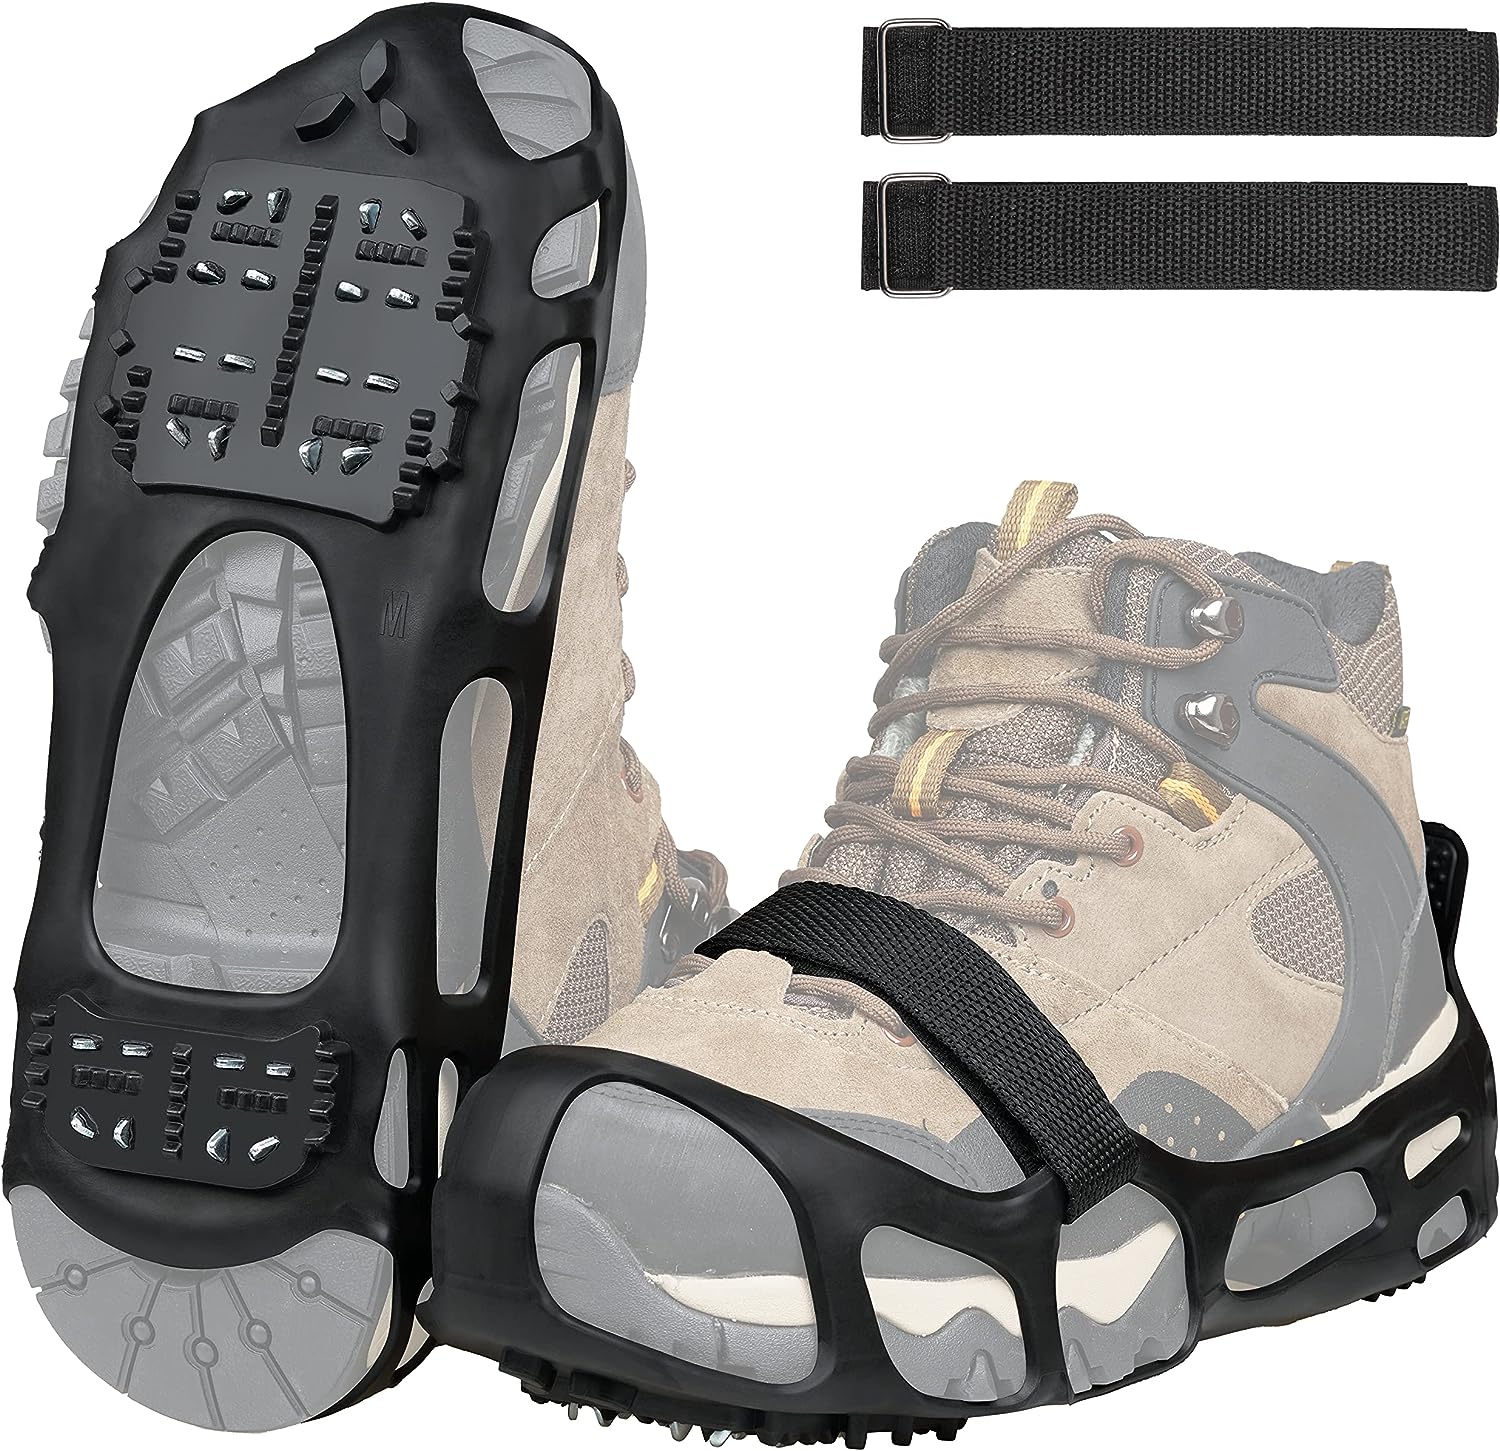 Ice Cleats for Shoes and Boots,Walk Traction Cleats [...]